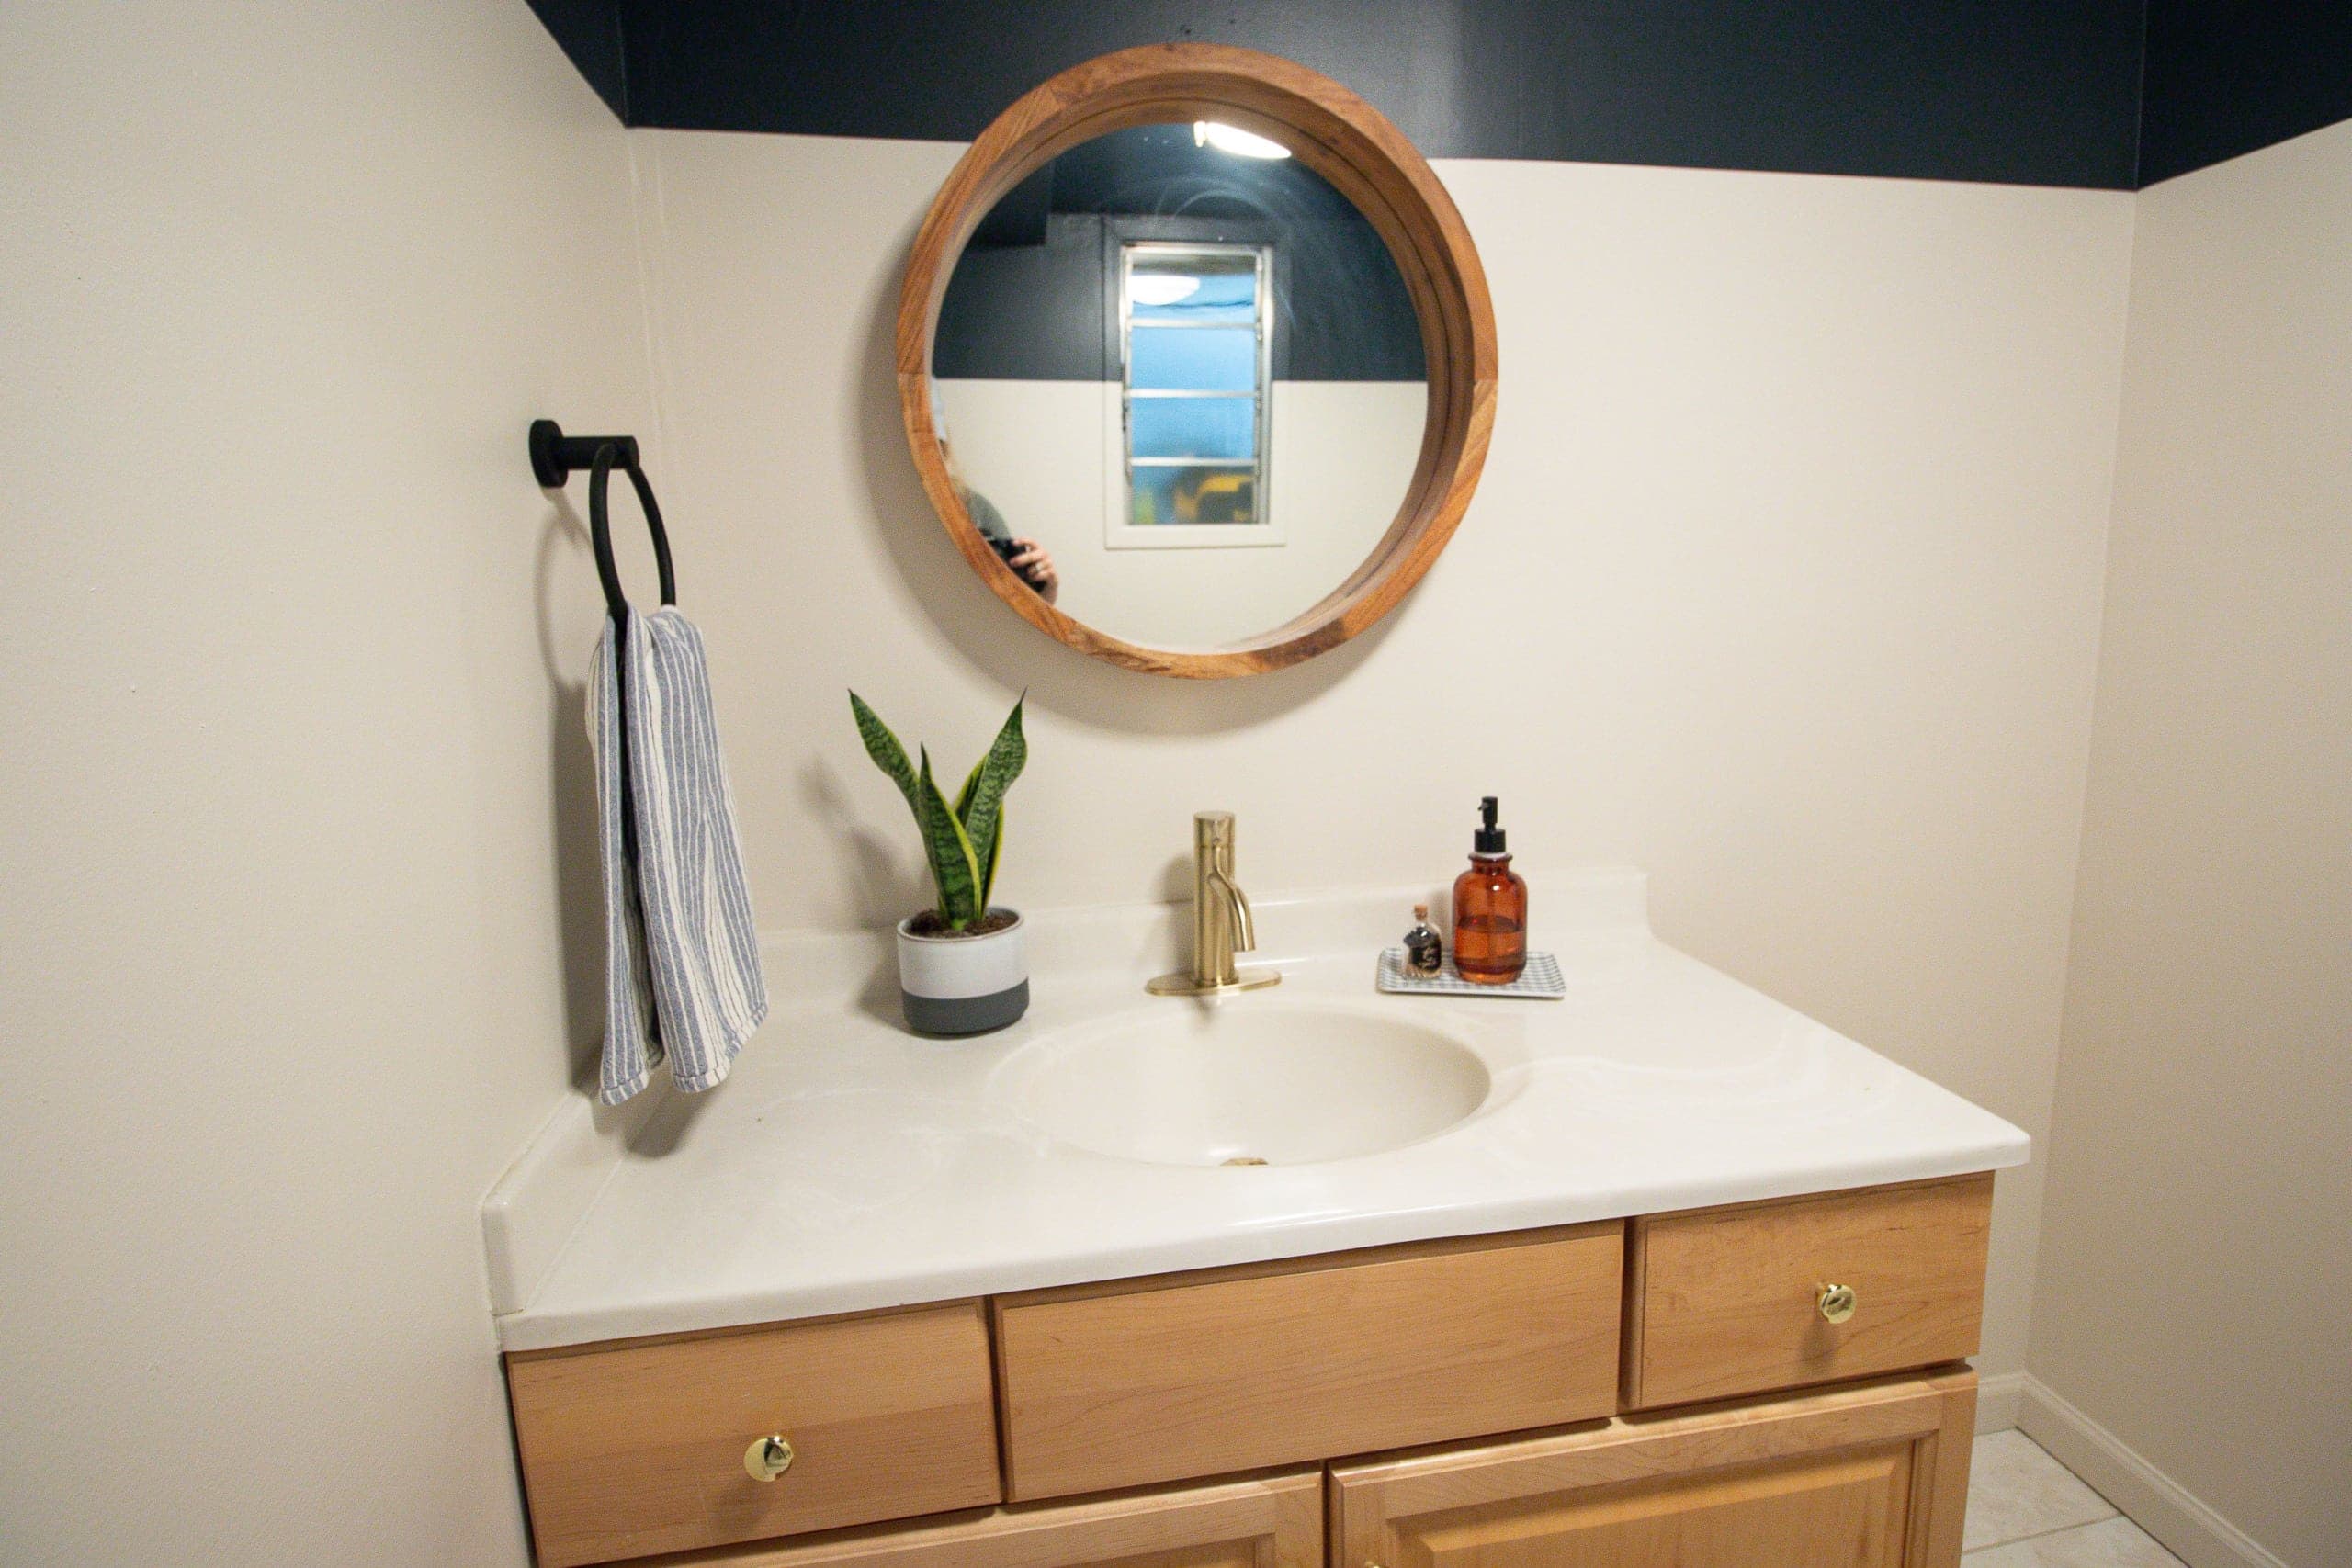 What's next in the basement bathroom remodel? 